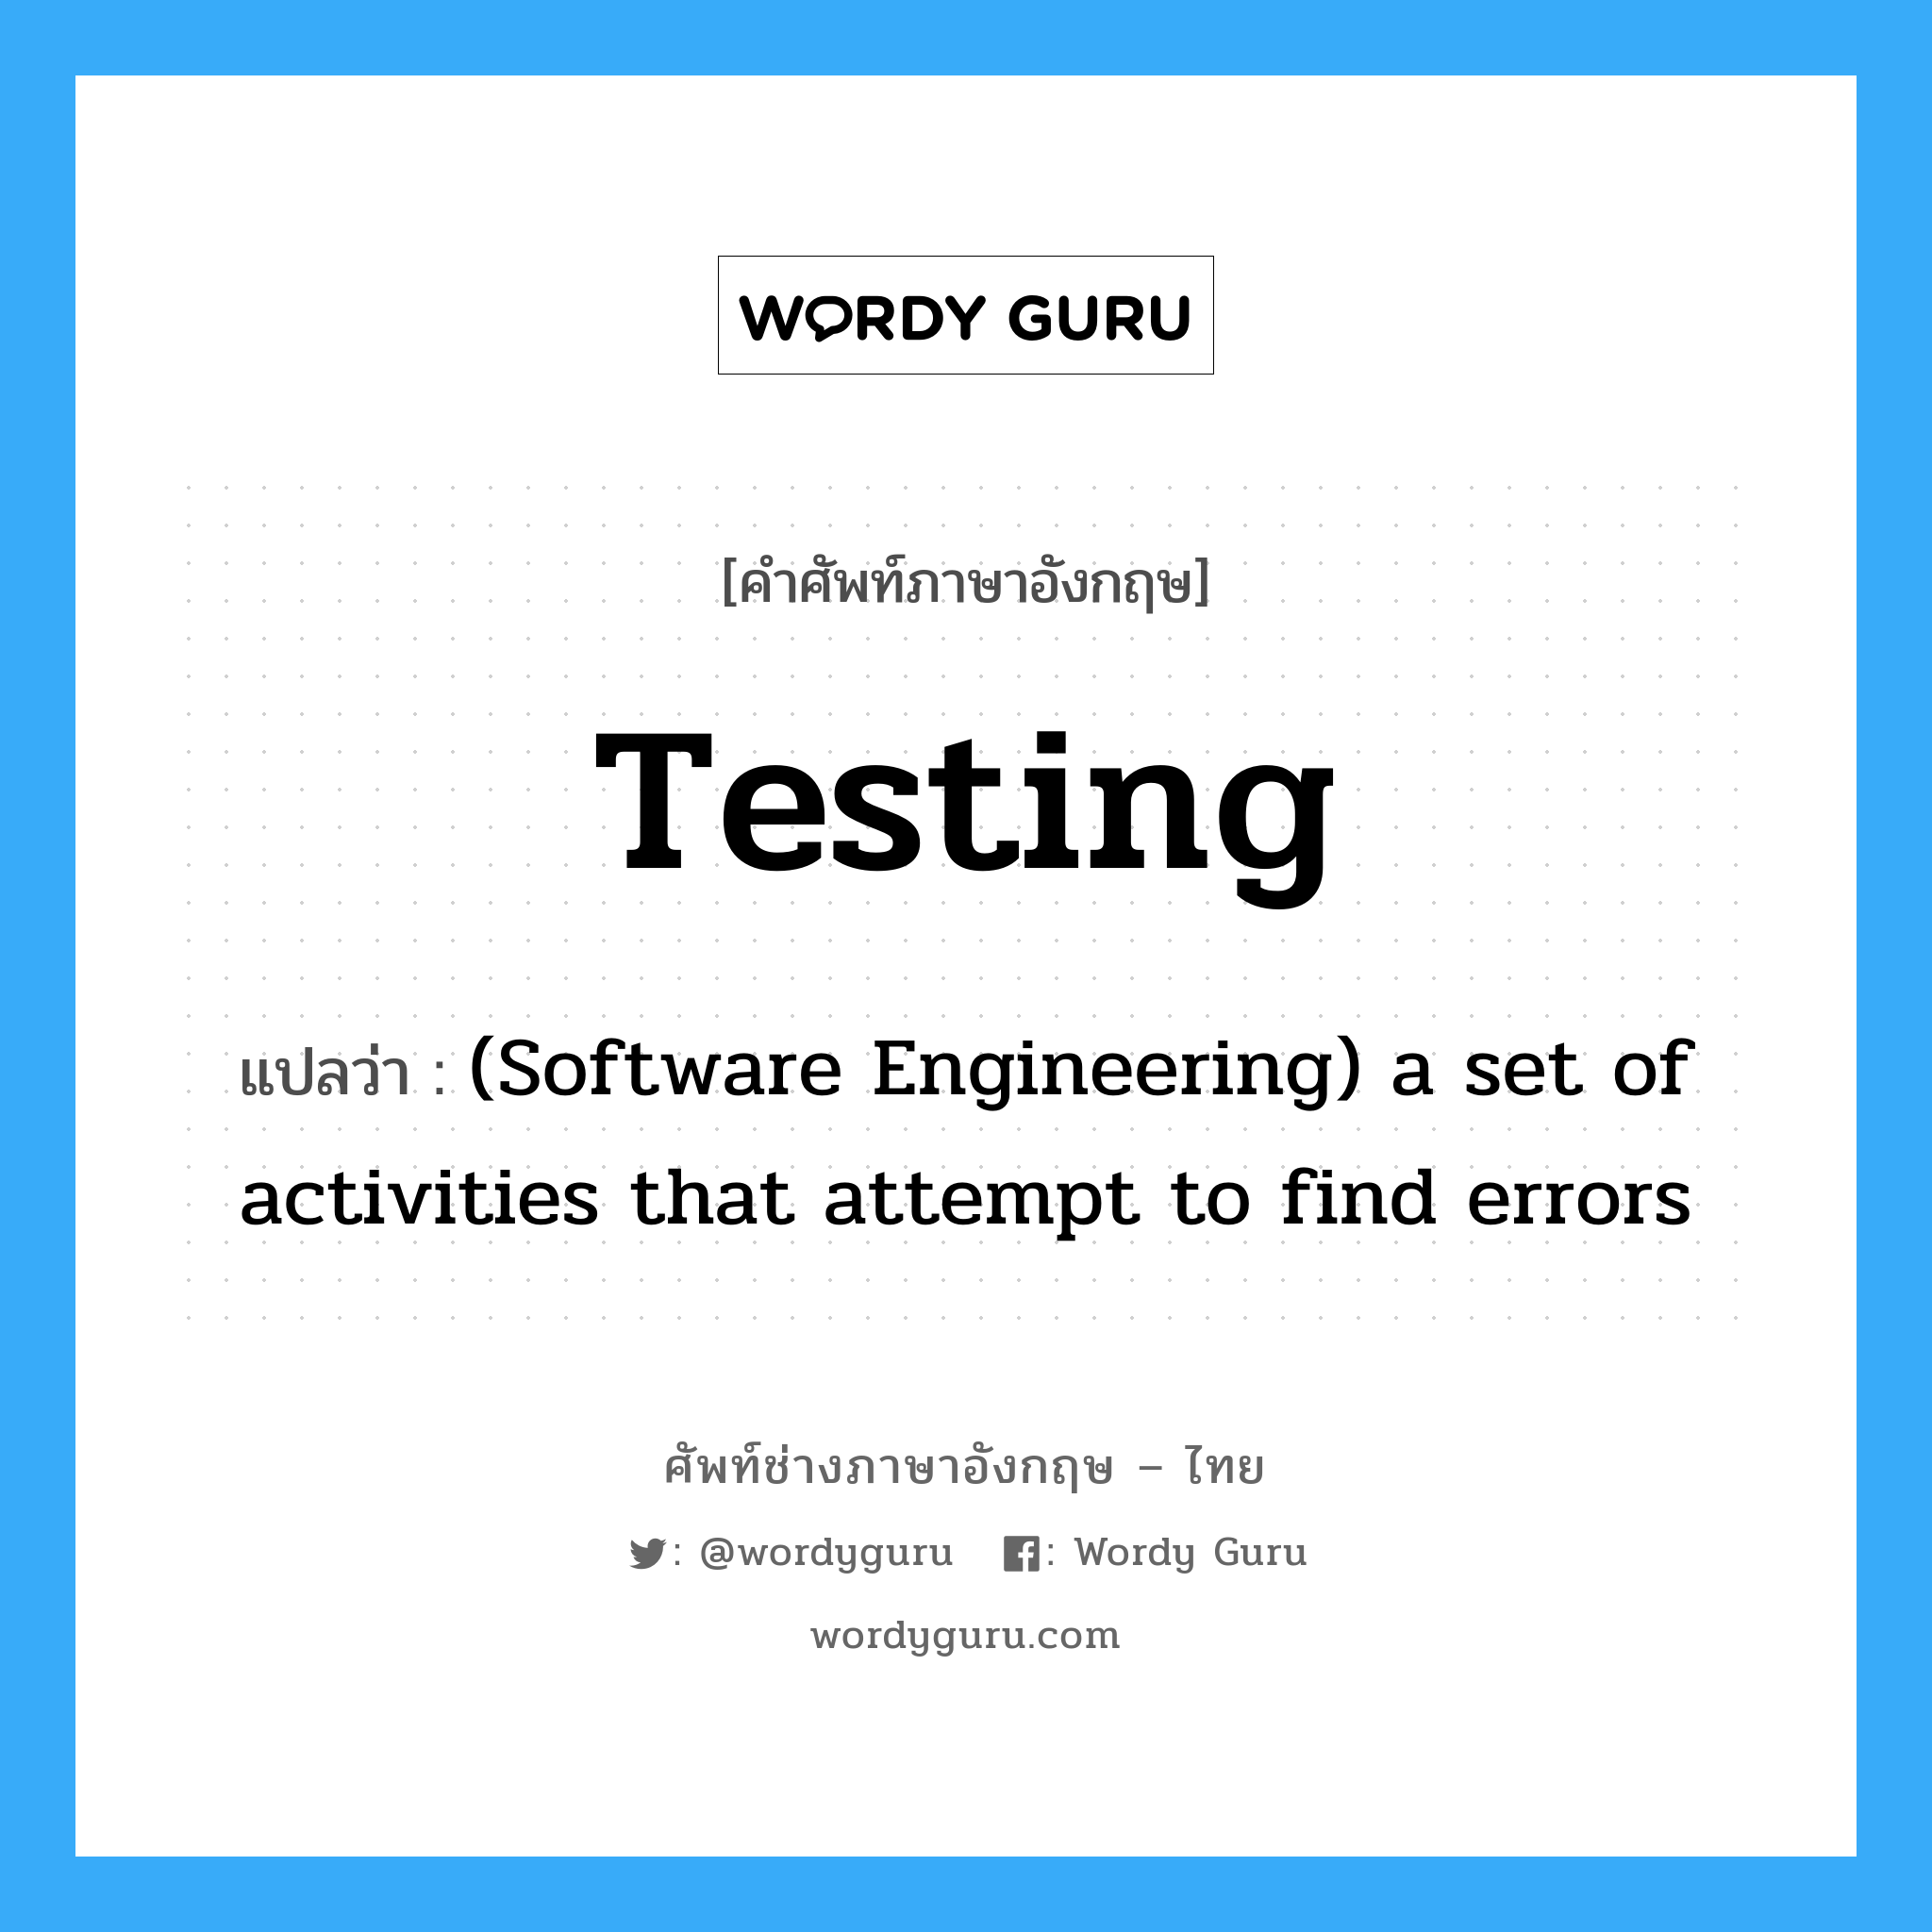 Testing แปลว่า?, คำศัพท์ช่างภาษาอังกฤษ - ไทย Testing คำศัพท์ภาษาอังกฤษ Testing แปลว่า (Software Engineering) a set of activities that attempt to find errors